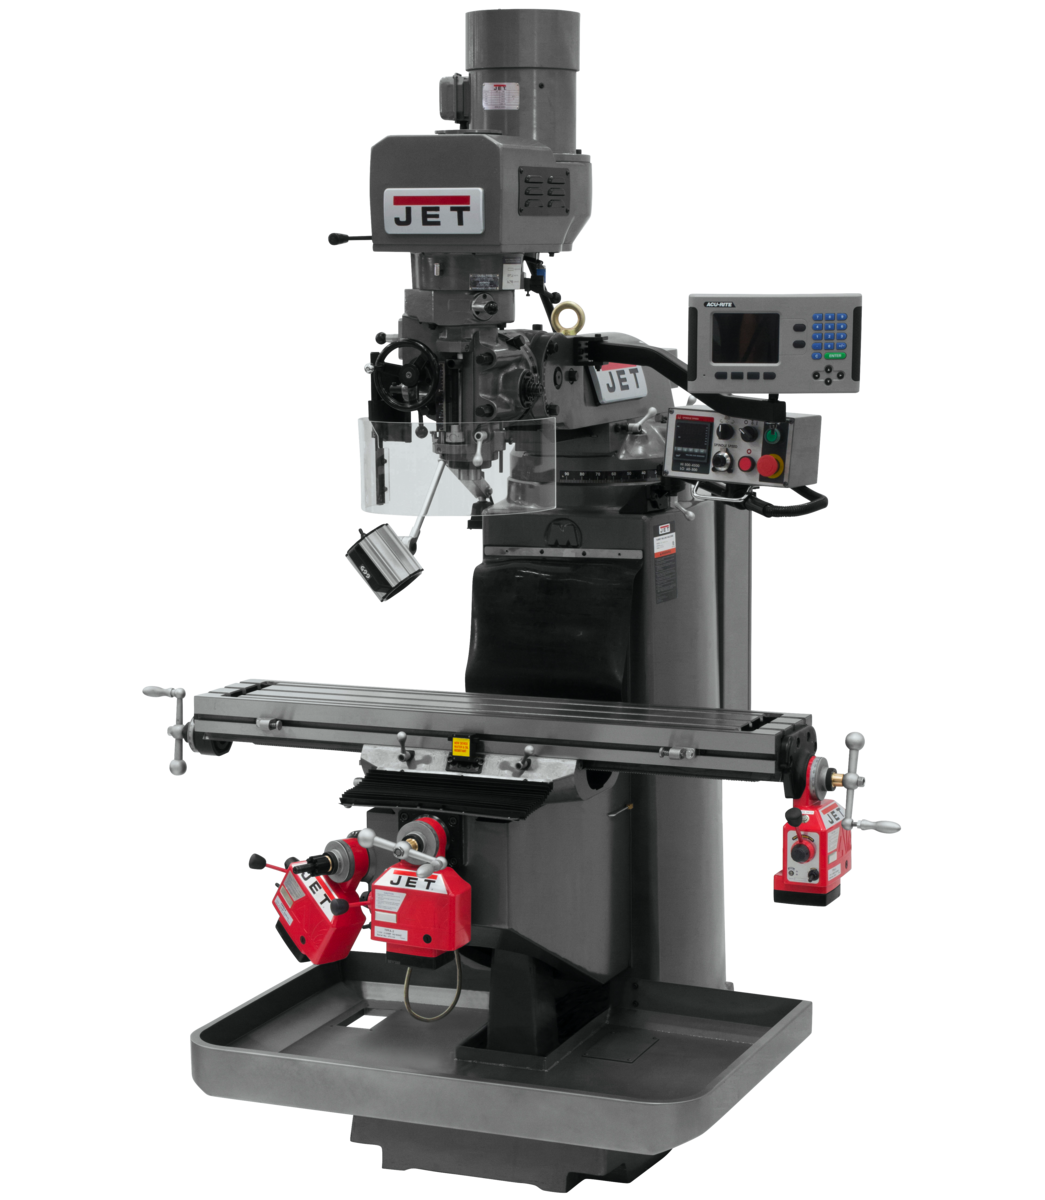 JTM-949EVS Mill With 3-Axis Acu-Rite 203 DRO (Knee) With X, Y and Z-Axis Powerfeeds